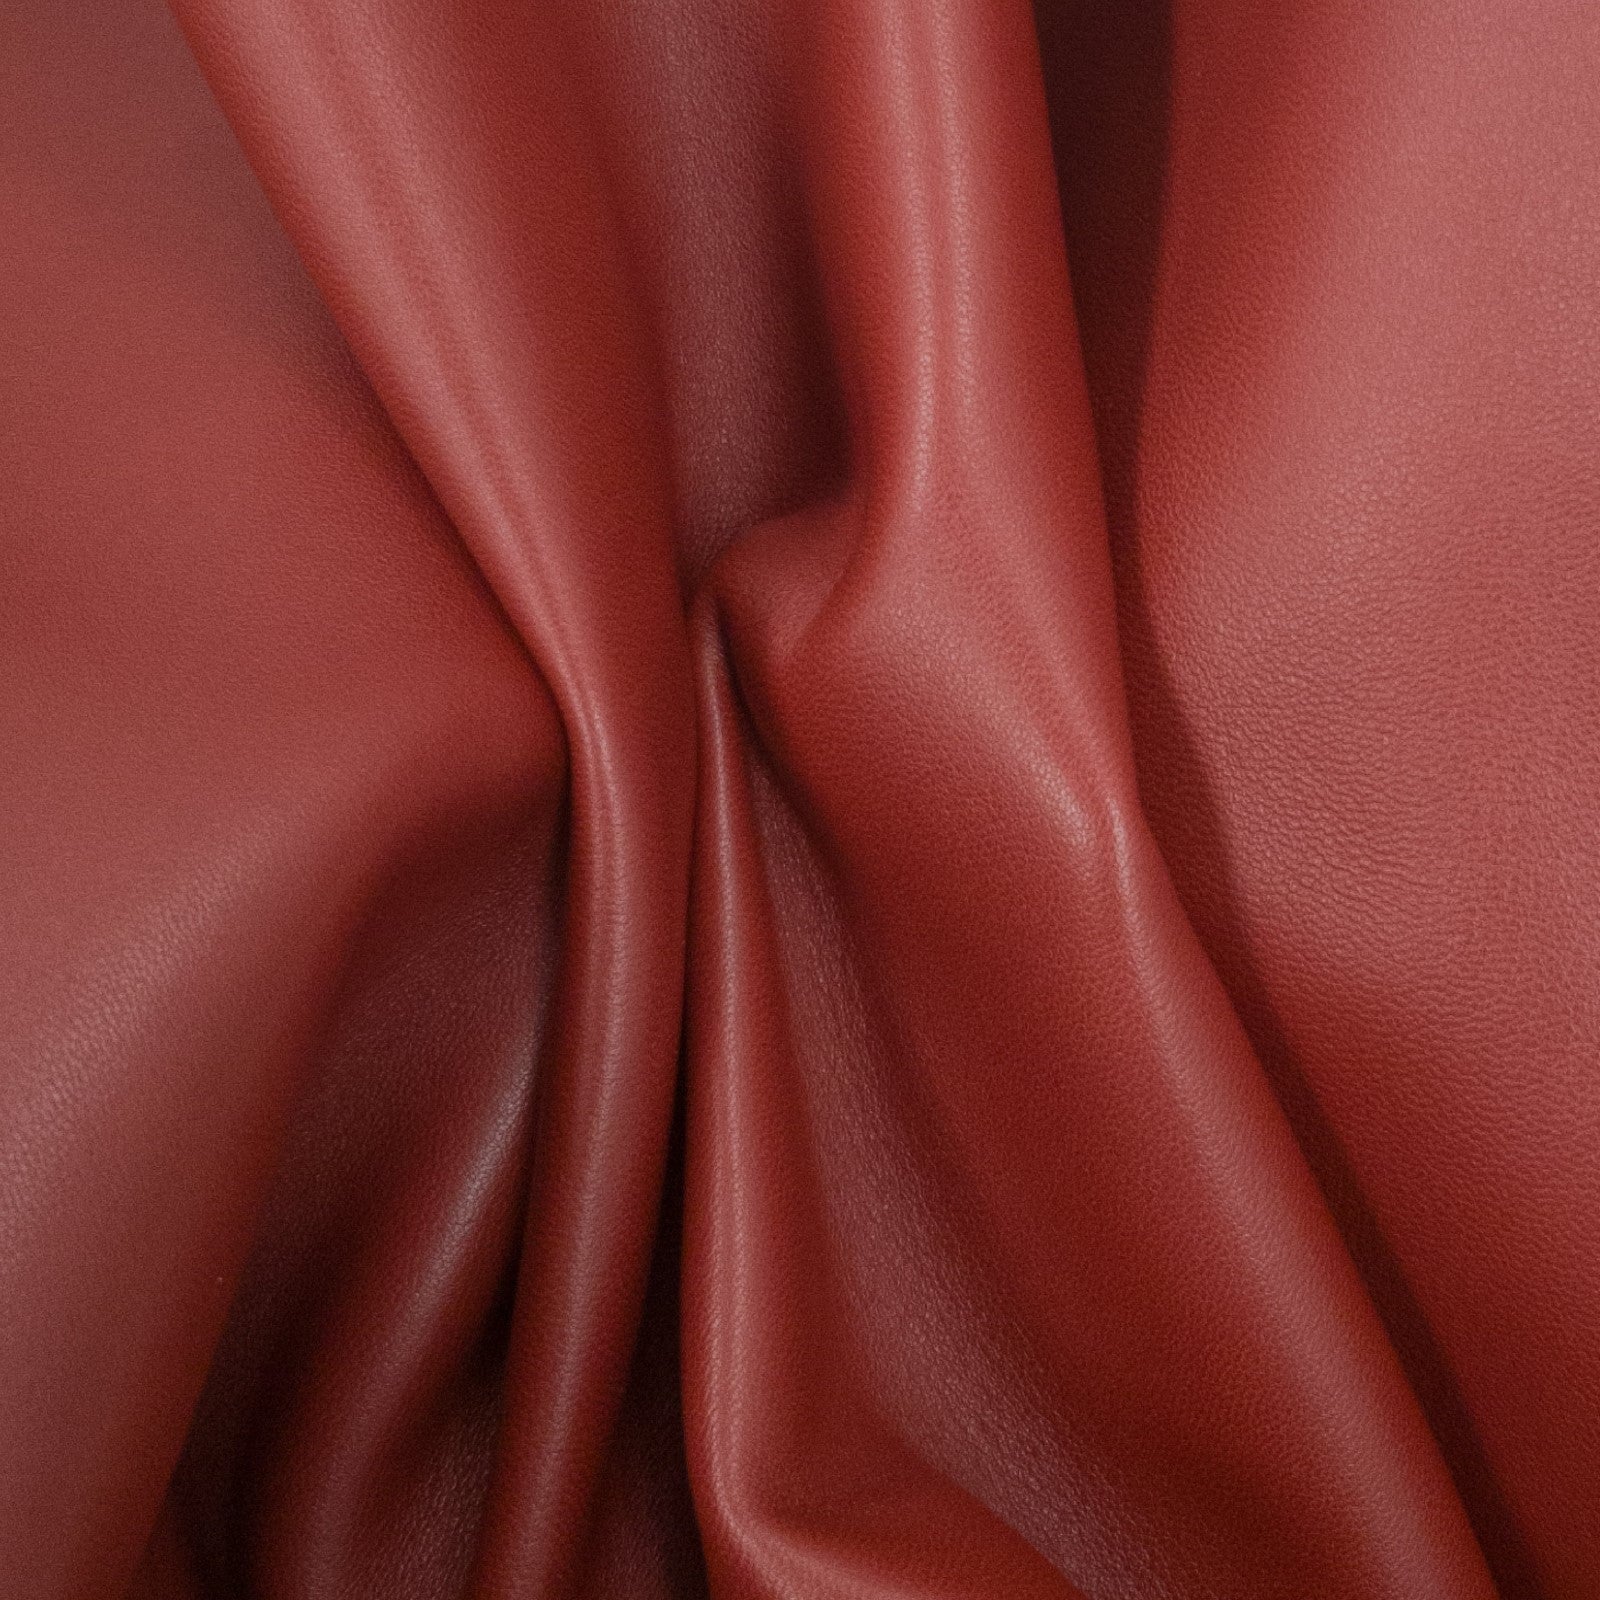 Reds, 3-10 Sq Ft, 1-3 oz, Lamb Hides, Ambrosia Red / 7-8 / 2-3 oz (.8-1.2 MM) | The Leather Guy